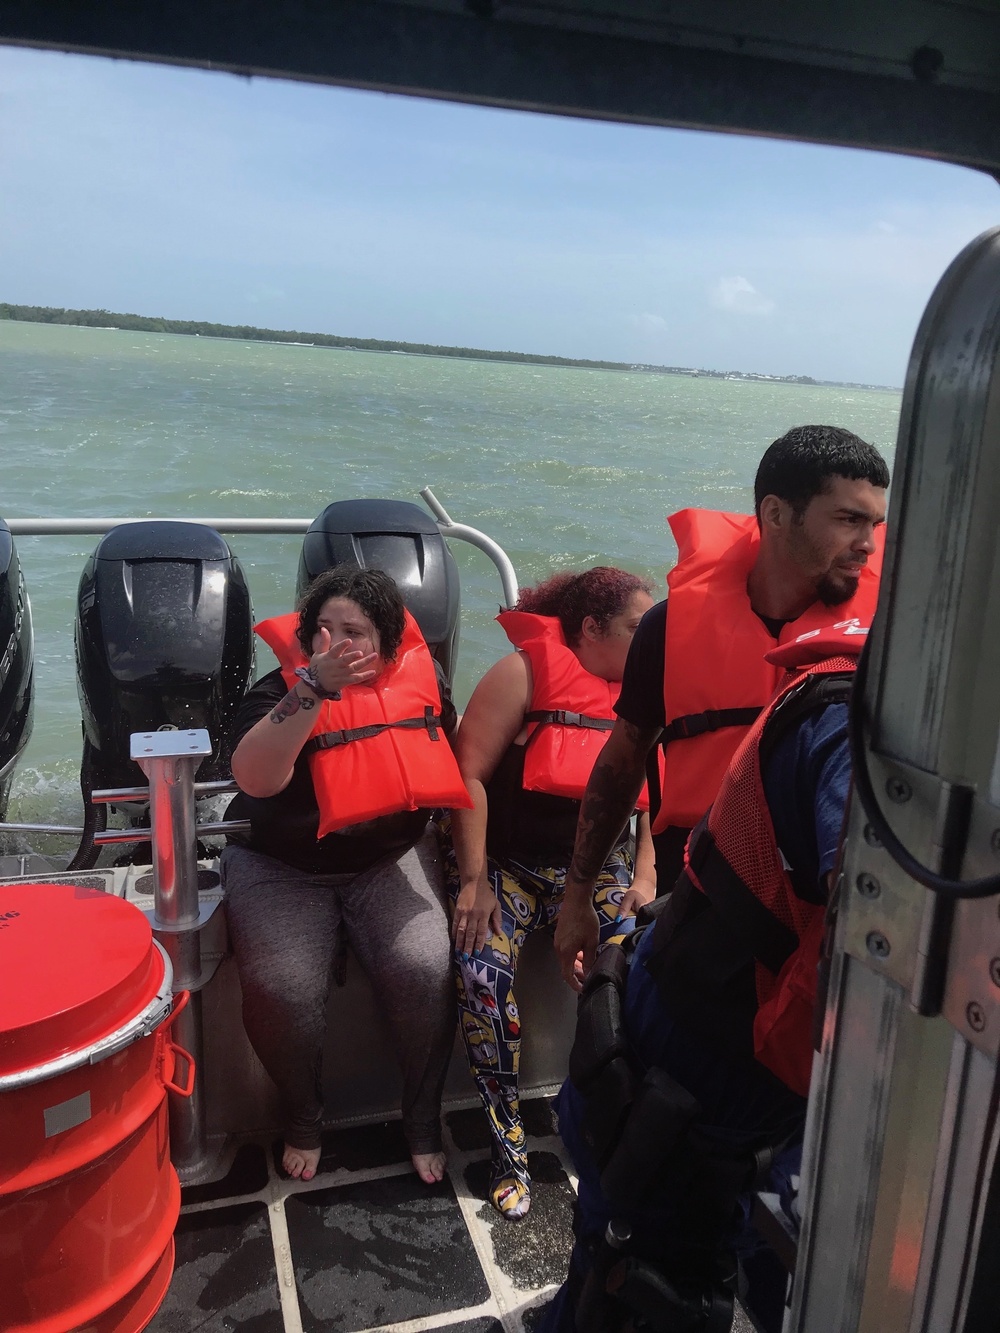 Coast Guard rescues 4 from water in Blackwater Sound near Key Largo